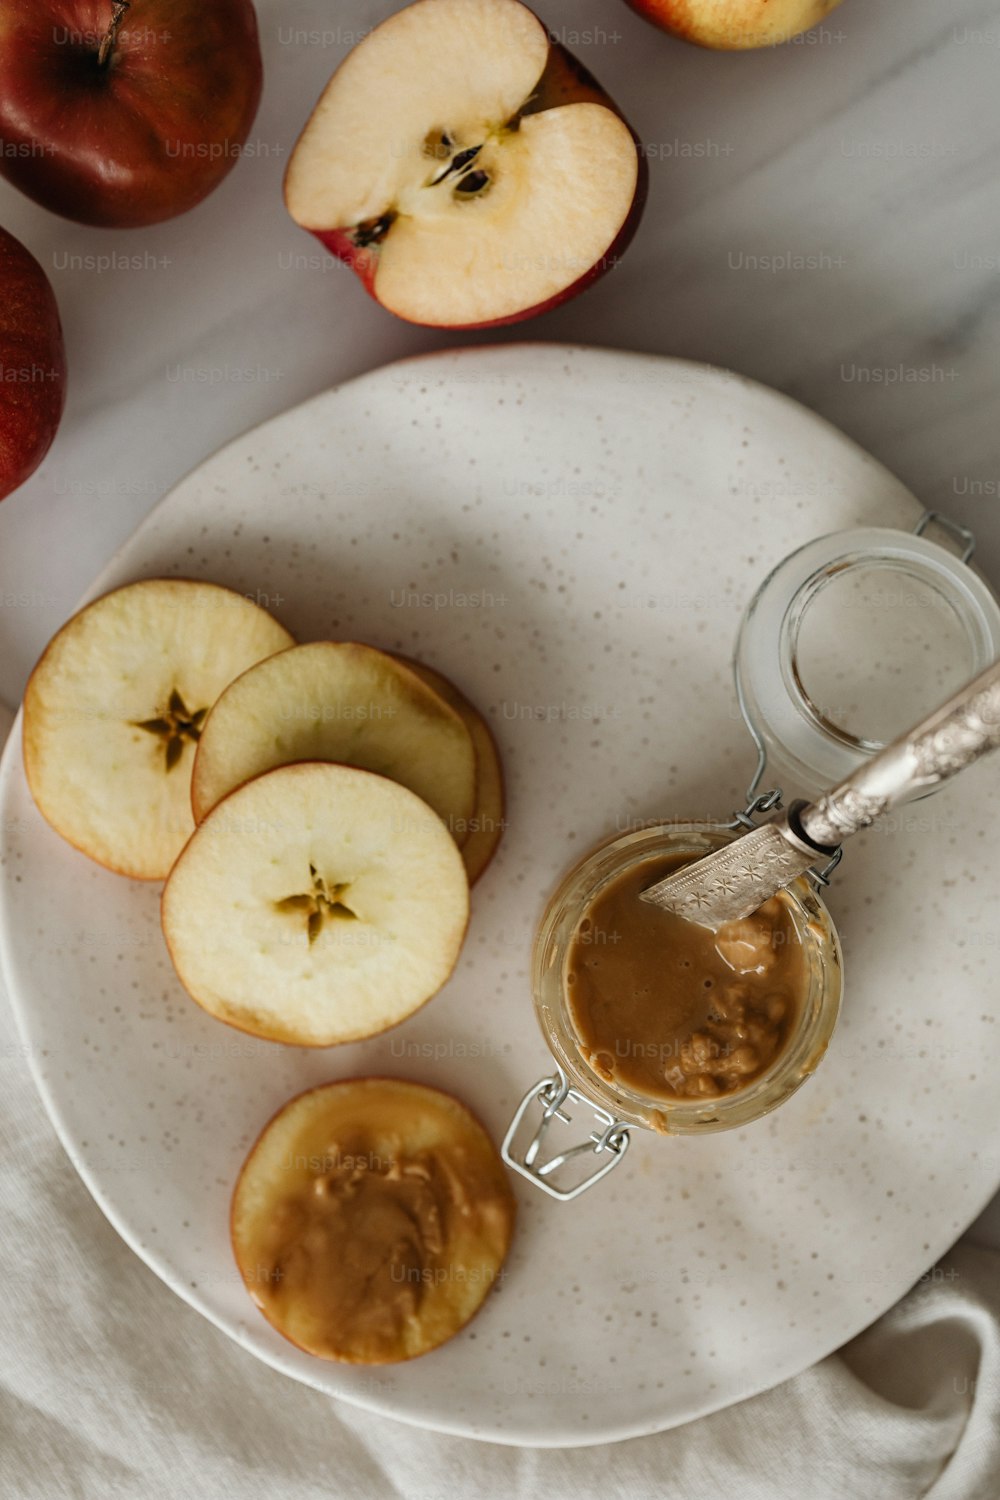 a white plate topped with apples and a jar of peanut butter